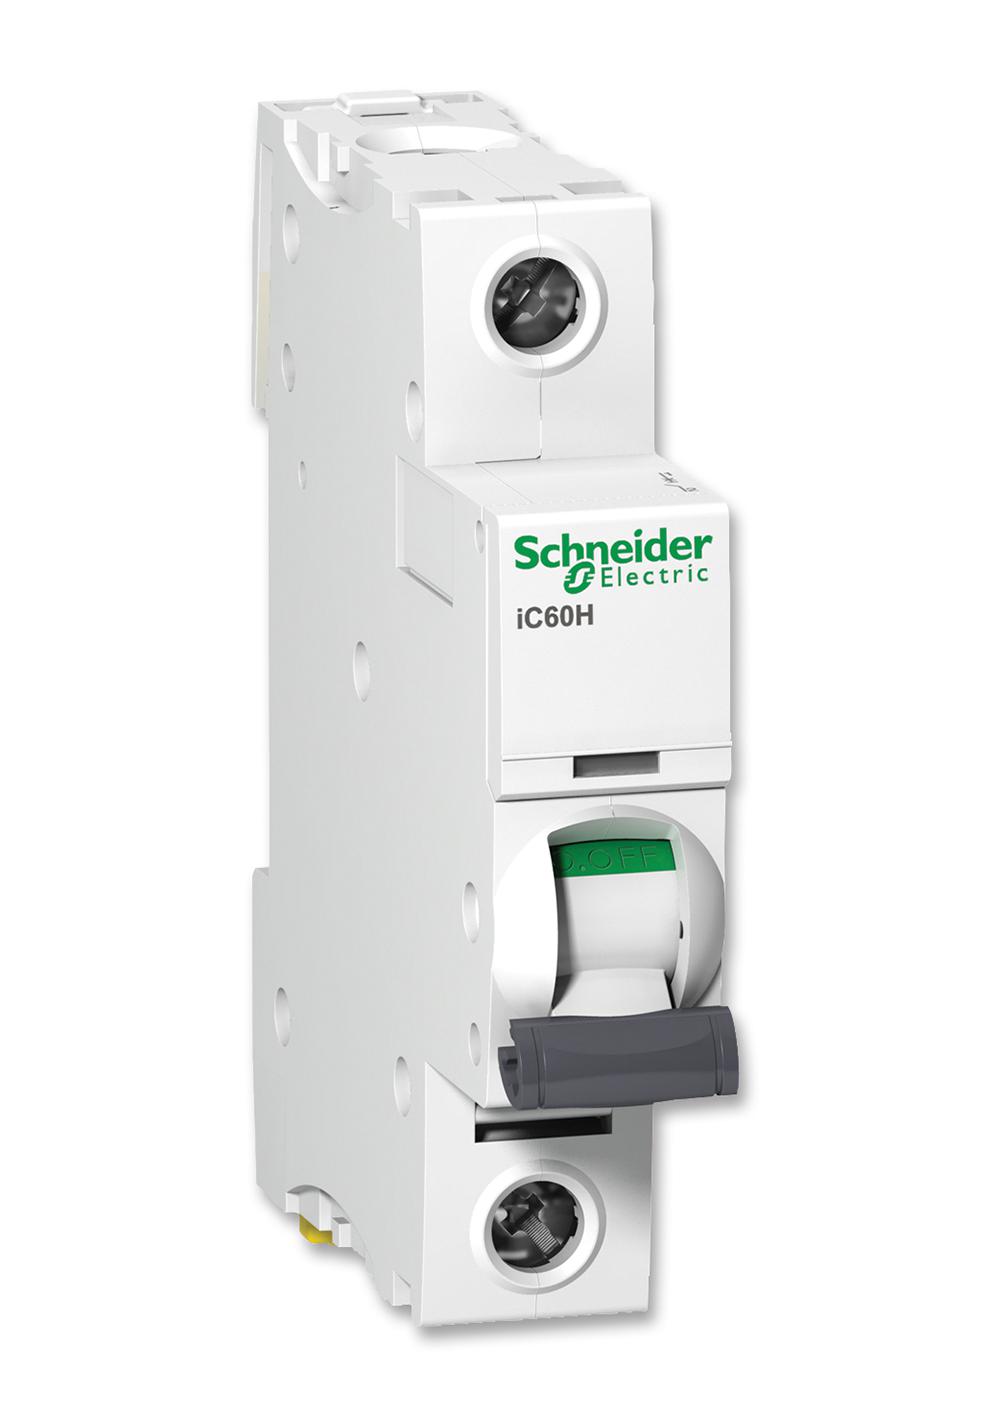 A9F54150 CIRCUIT BREAKER, THERMAL MAGNETIC, 1POLE SCHNEIDER ELECTRIC